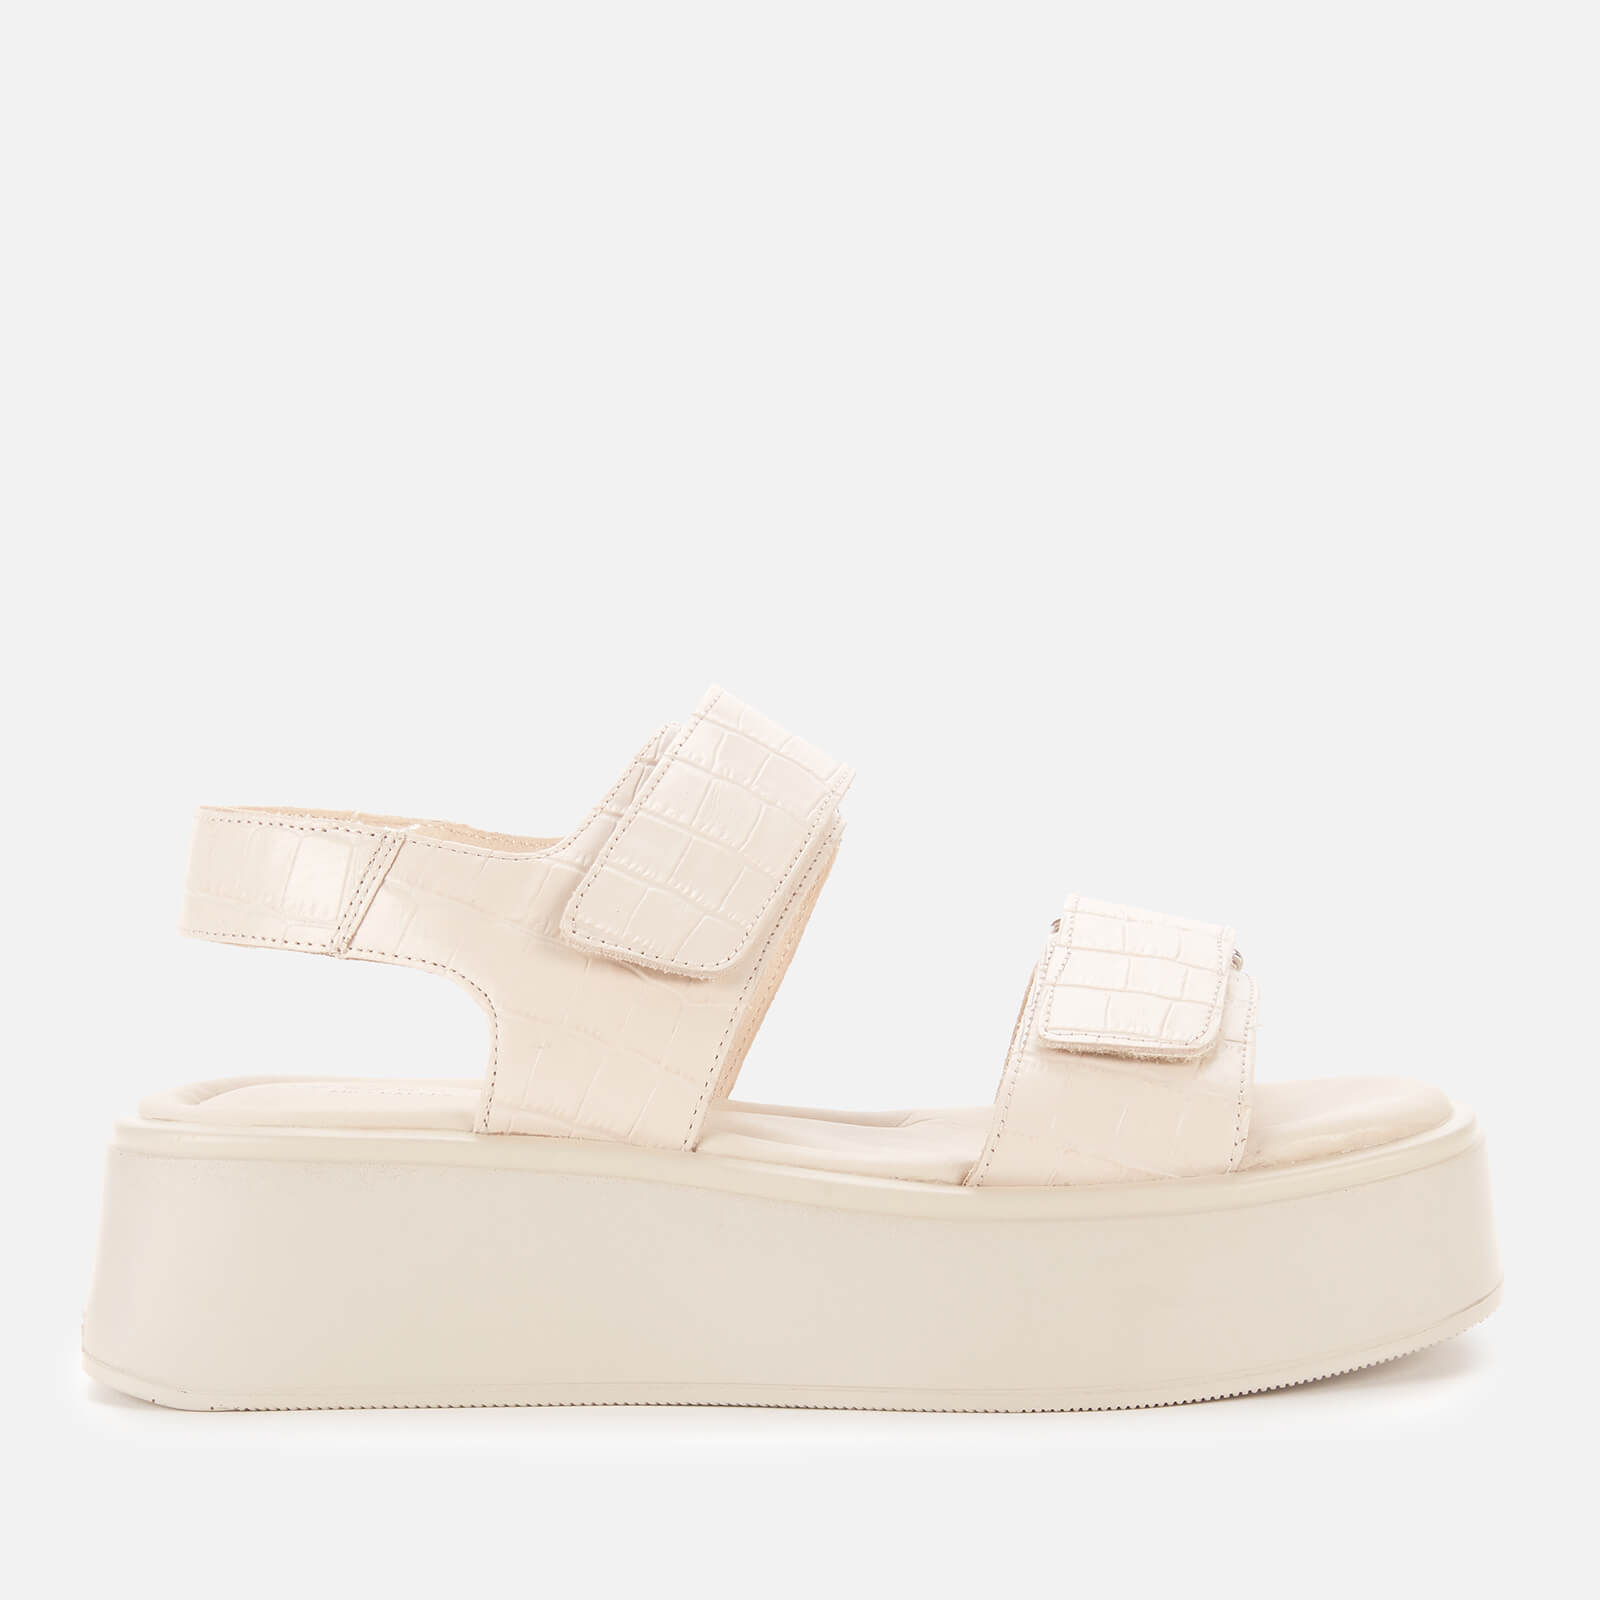 Vagabond Women's Courtney Embossed Leather Double Strap Sandals - Off White - UK 4